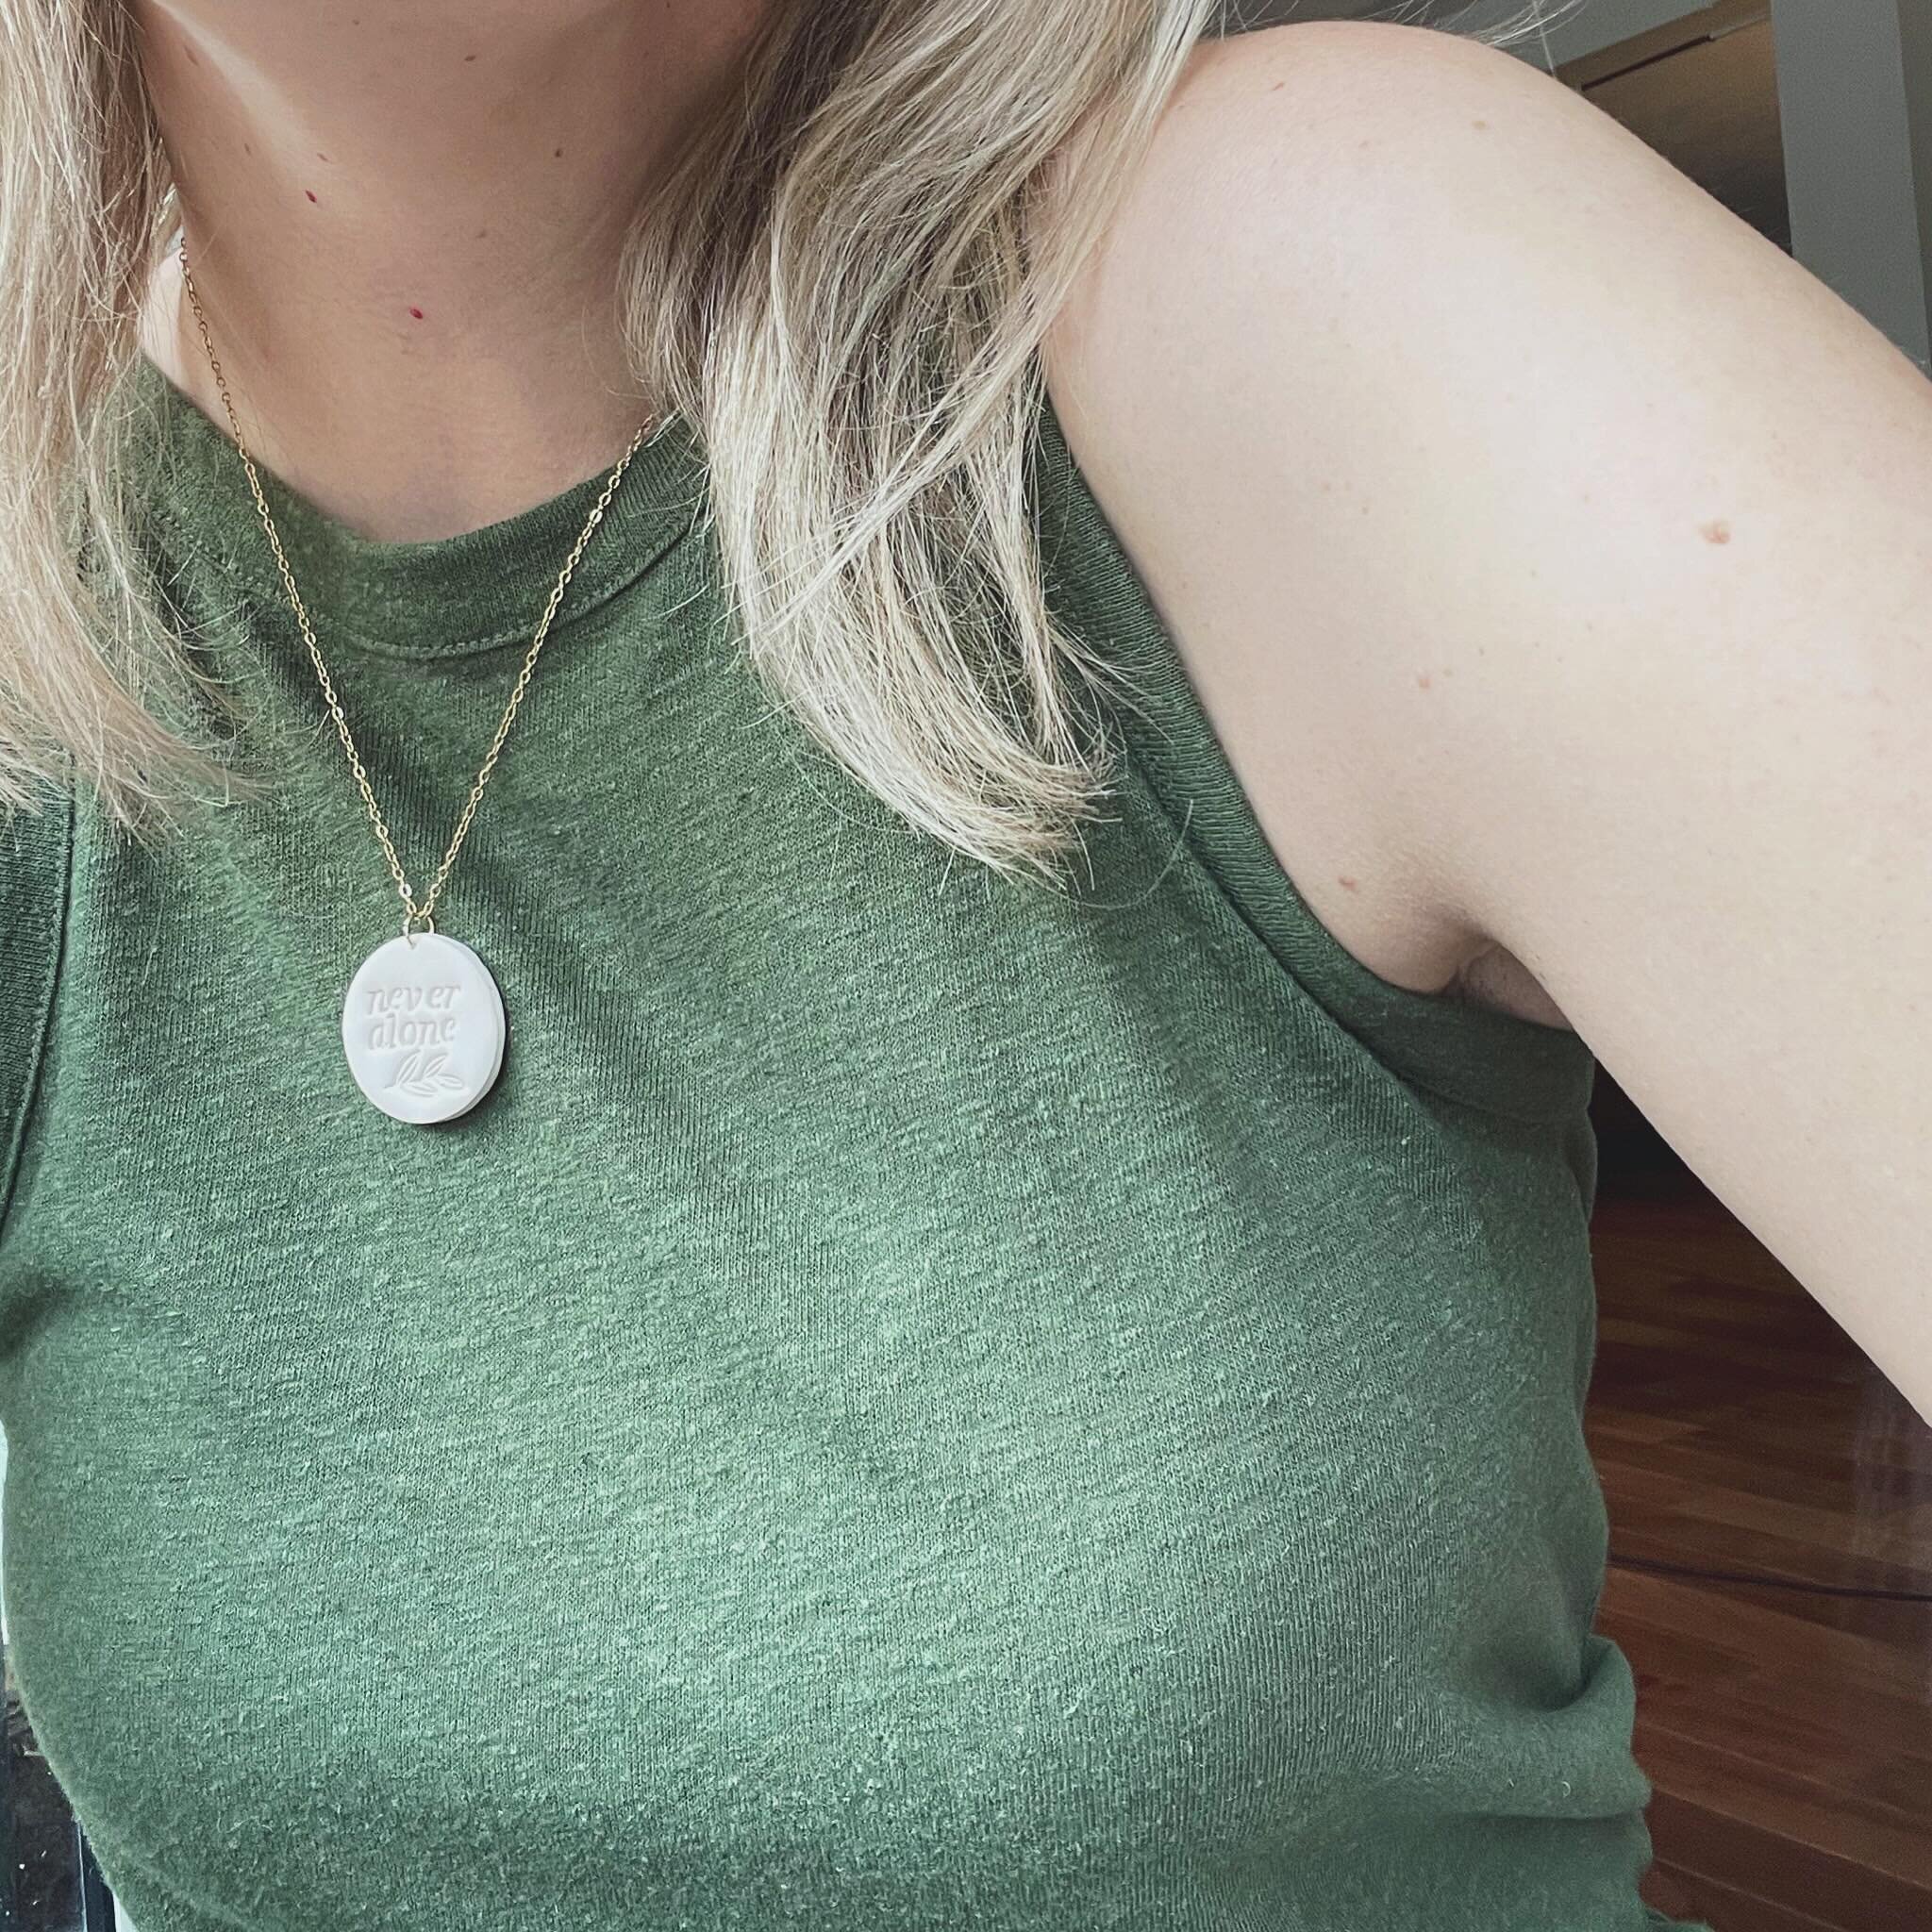 Our Never Alone polymer clay necklaces come in two colours - Linen and Slate - and are the perfect reminder that you&rsquo;re not alone on this journey! 💫